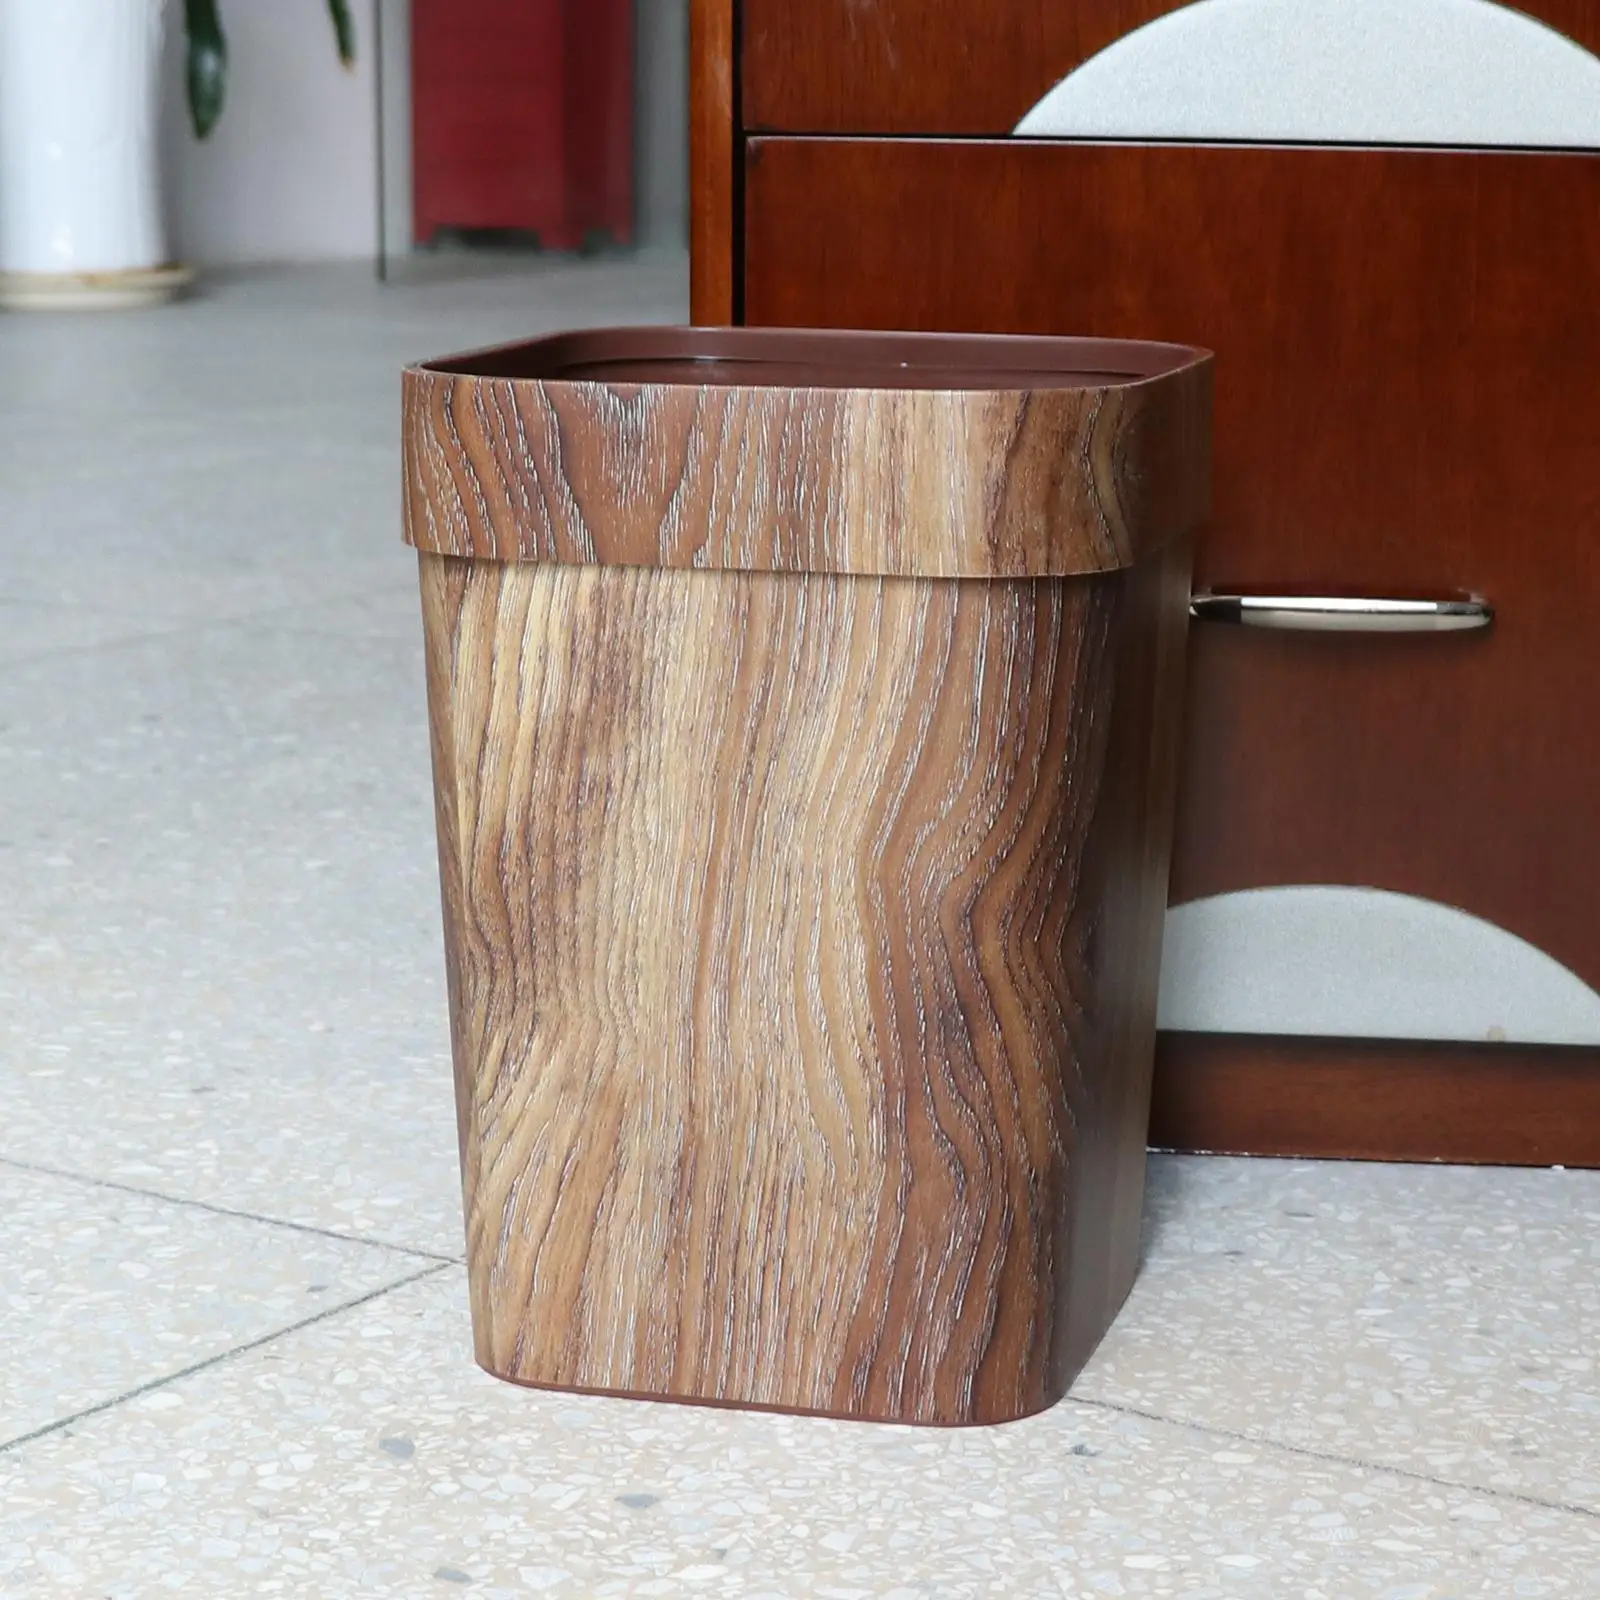 Retro Trash Can Decorative Plastic for living room and office